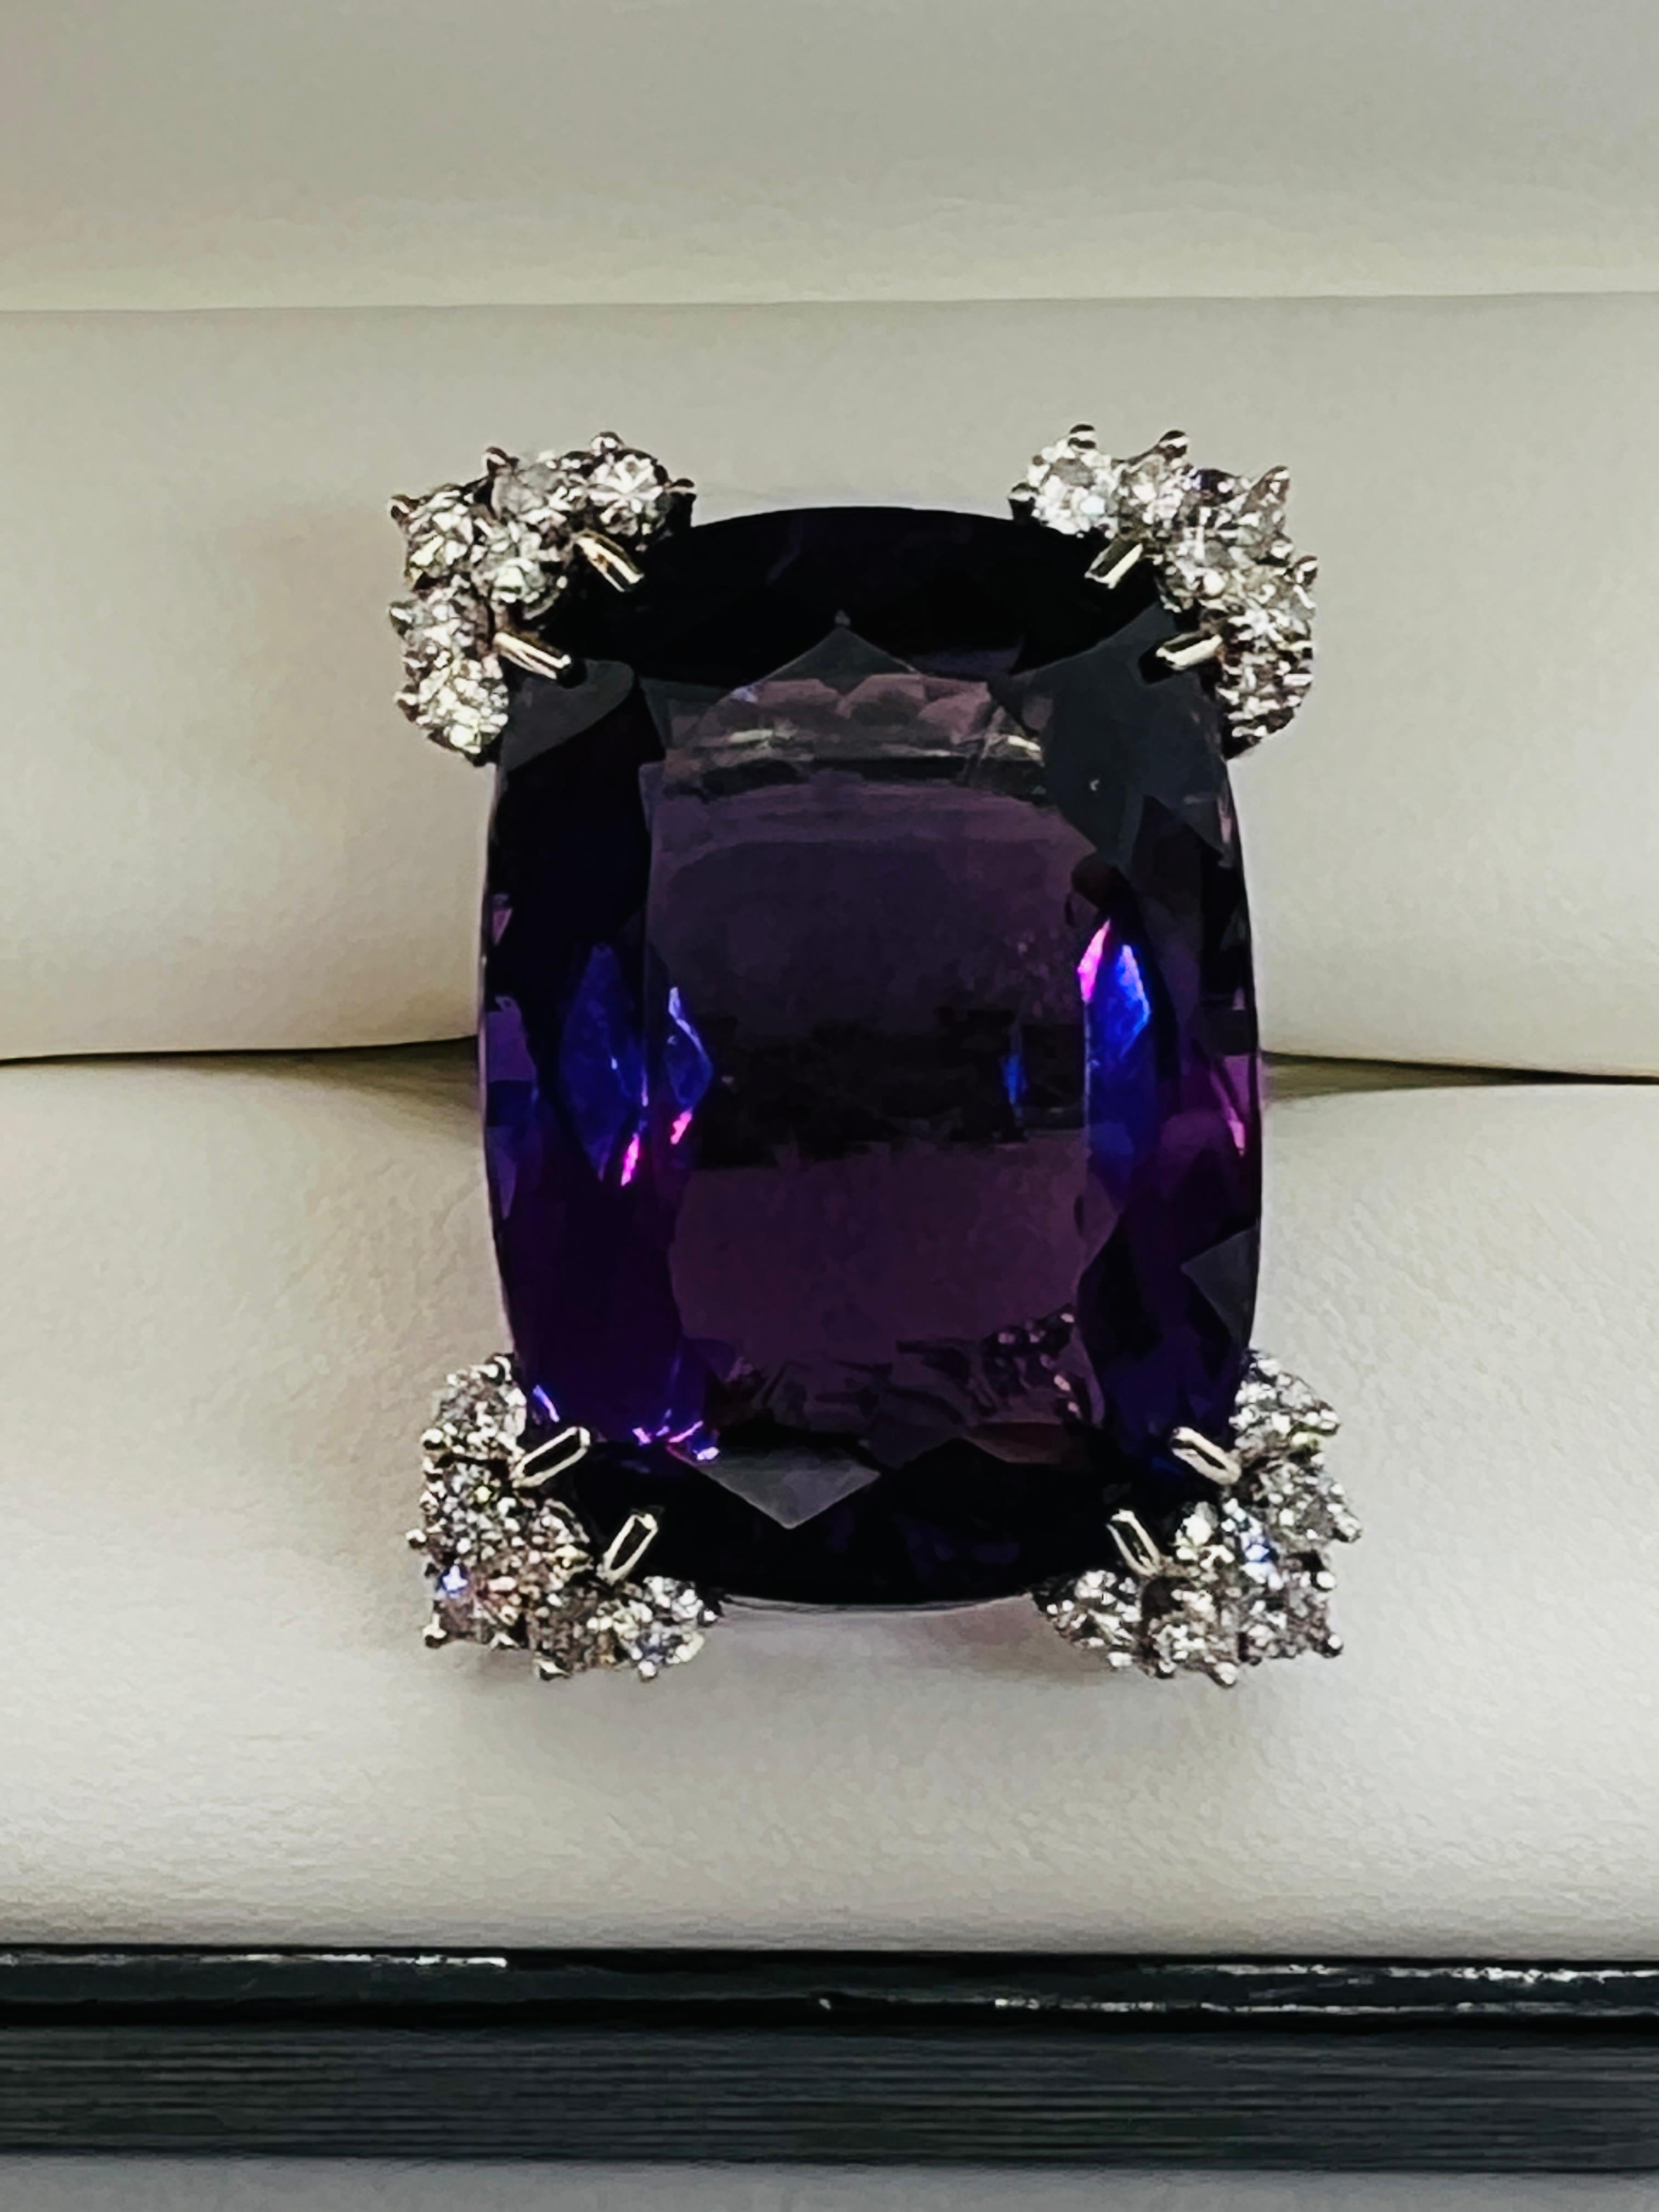 Stunning White Gold Ladies Cocktail Ring! At the center is a cushion cut, 44 carat amethyst that measures 1.25 inches by .75 inch. On each corner of the stone, the prongs are set with 6 round diamonds each. The total number of diamonds is 24 with an